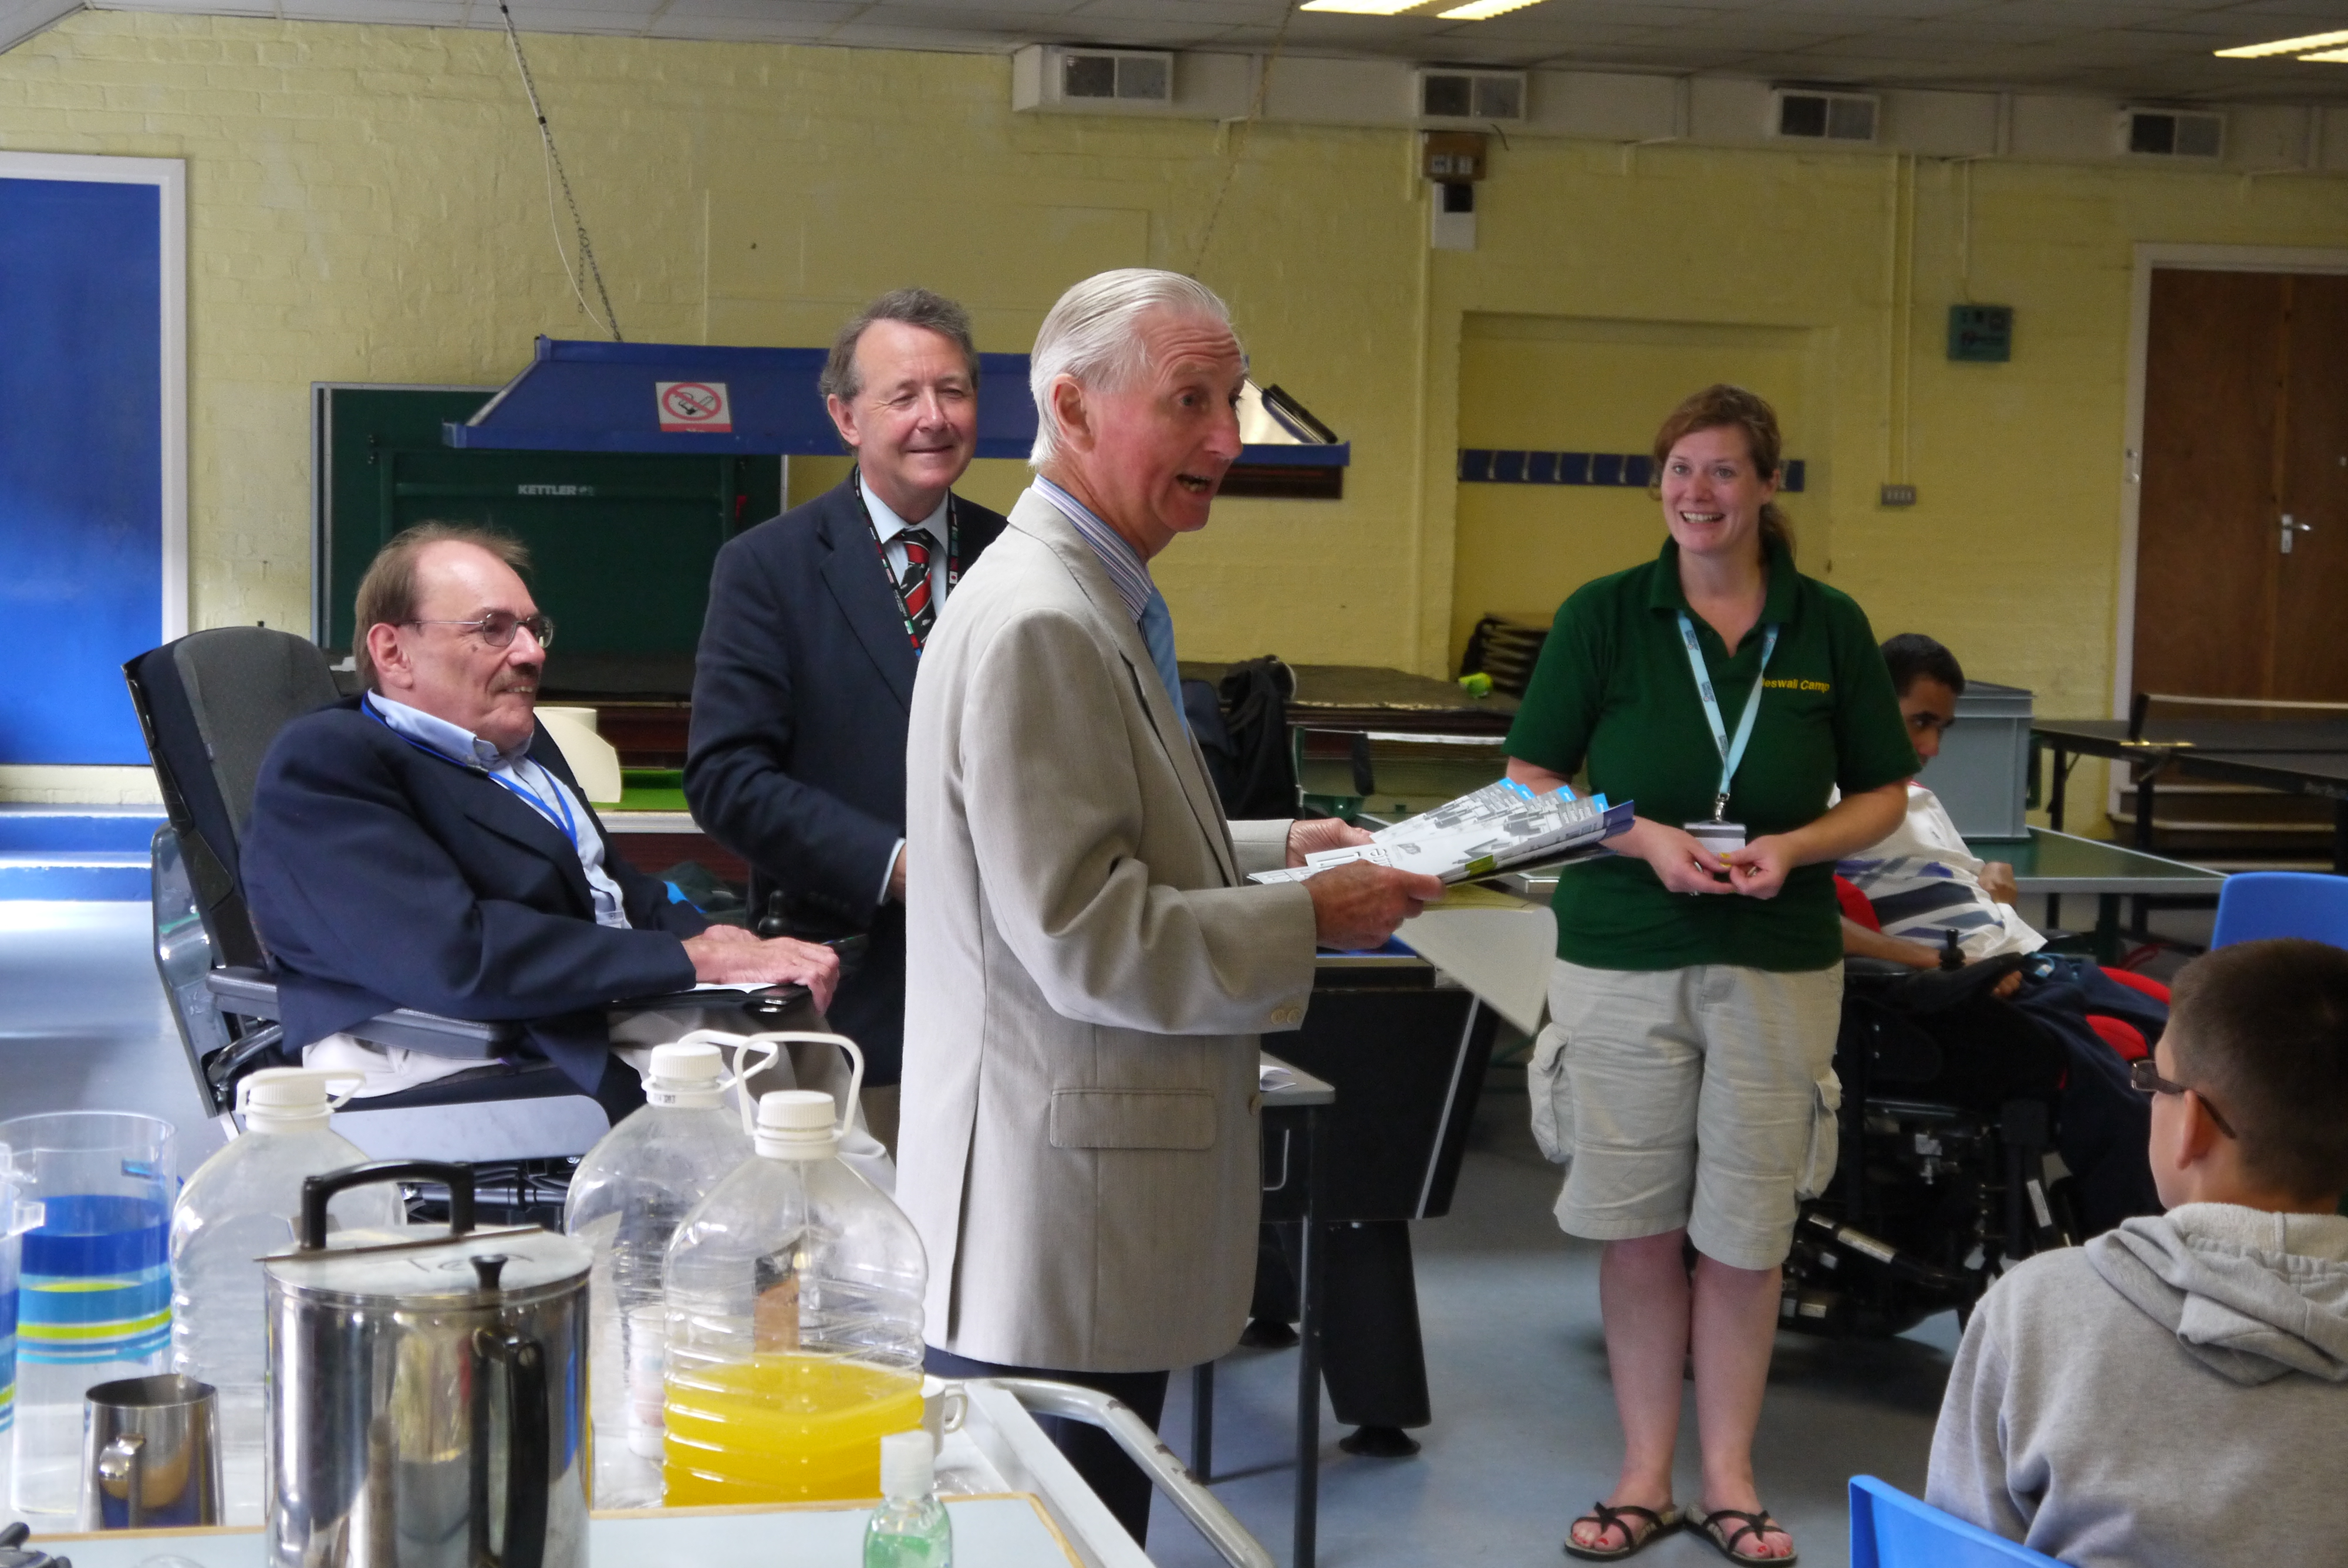 Sir Bert Massie CBE and David Alton with some of the Heswall Holiday Camp Volunteers, 2013